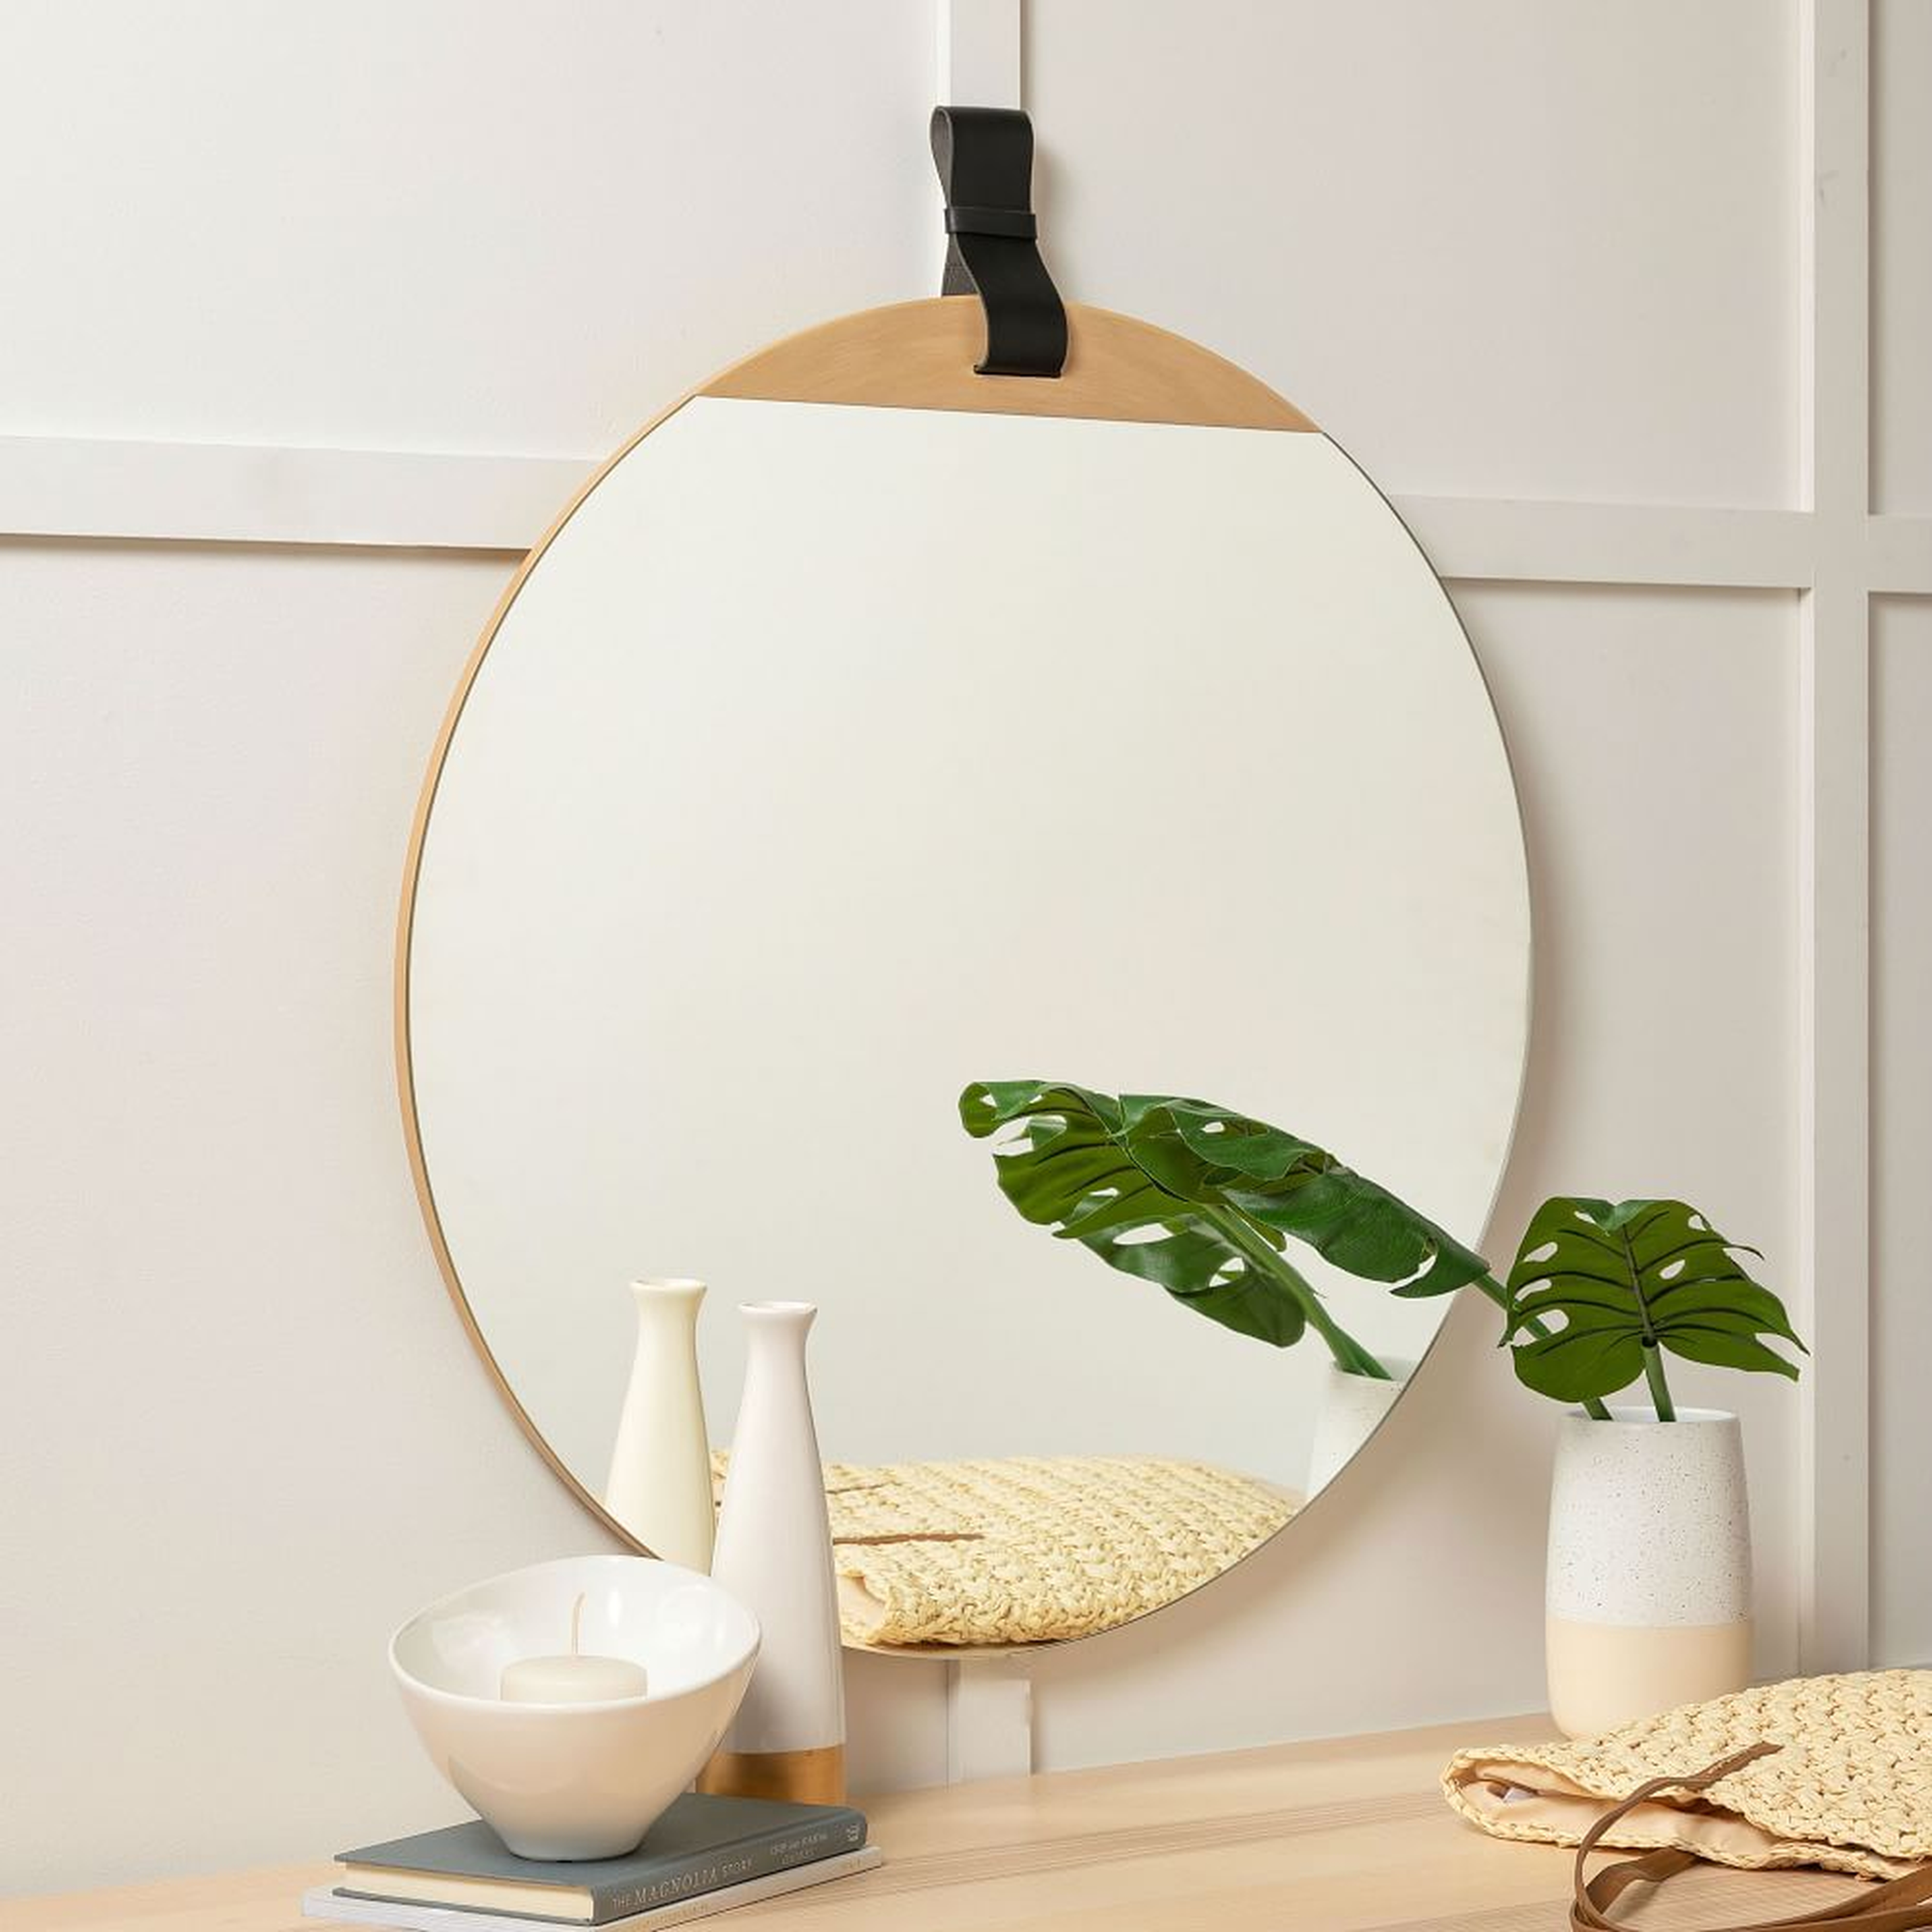 Leather Strap Hanging Mirror, 33"x30" - West Elm